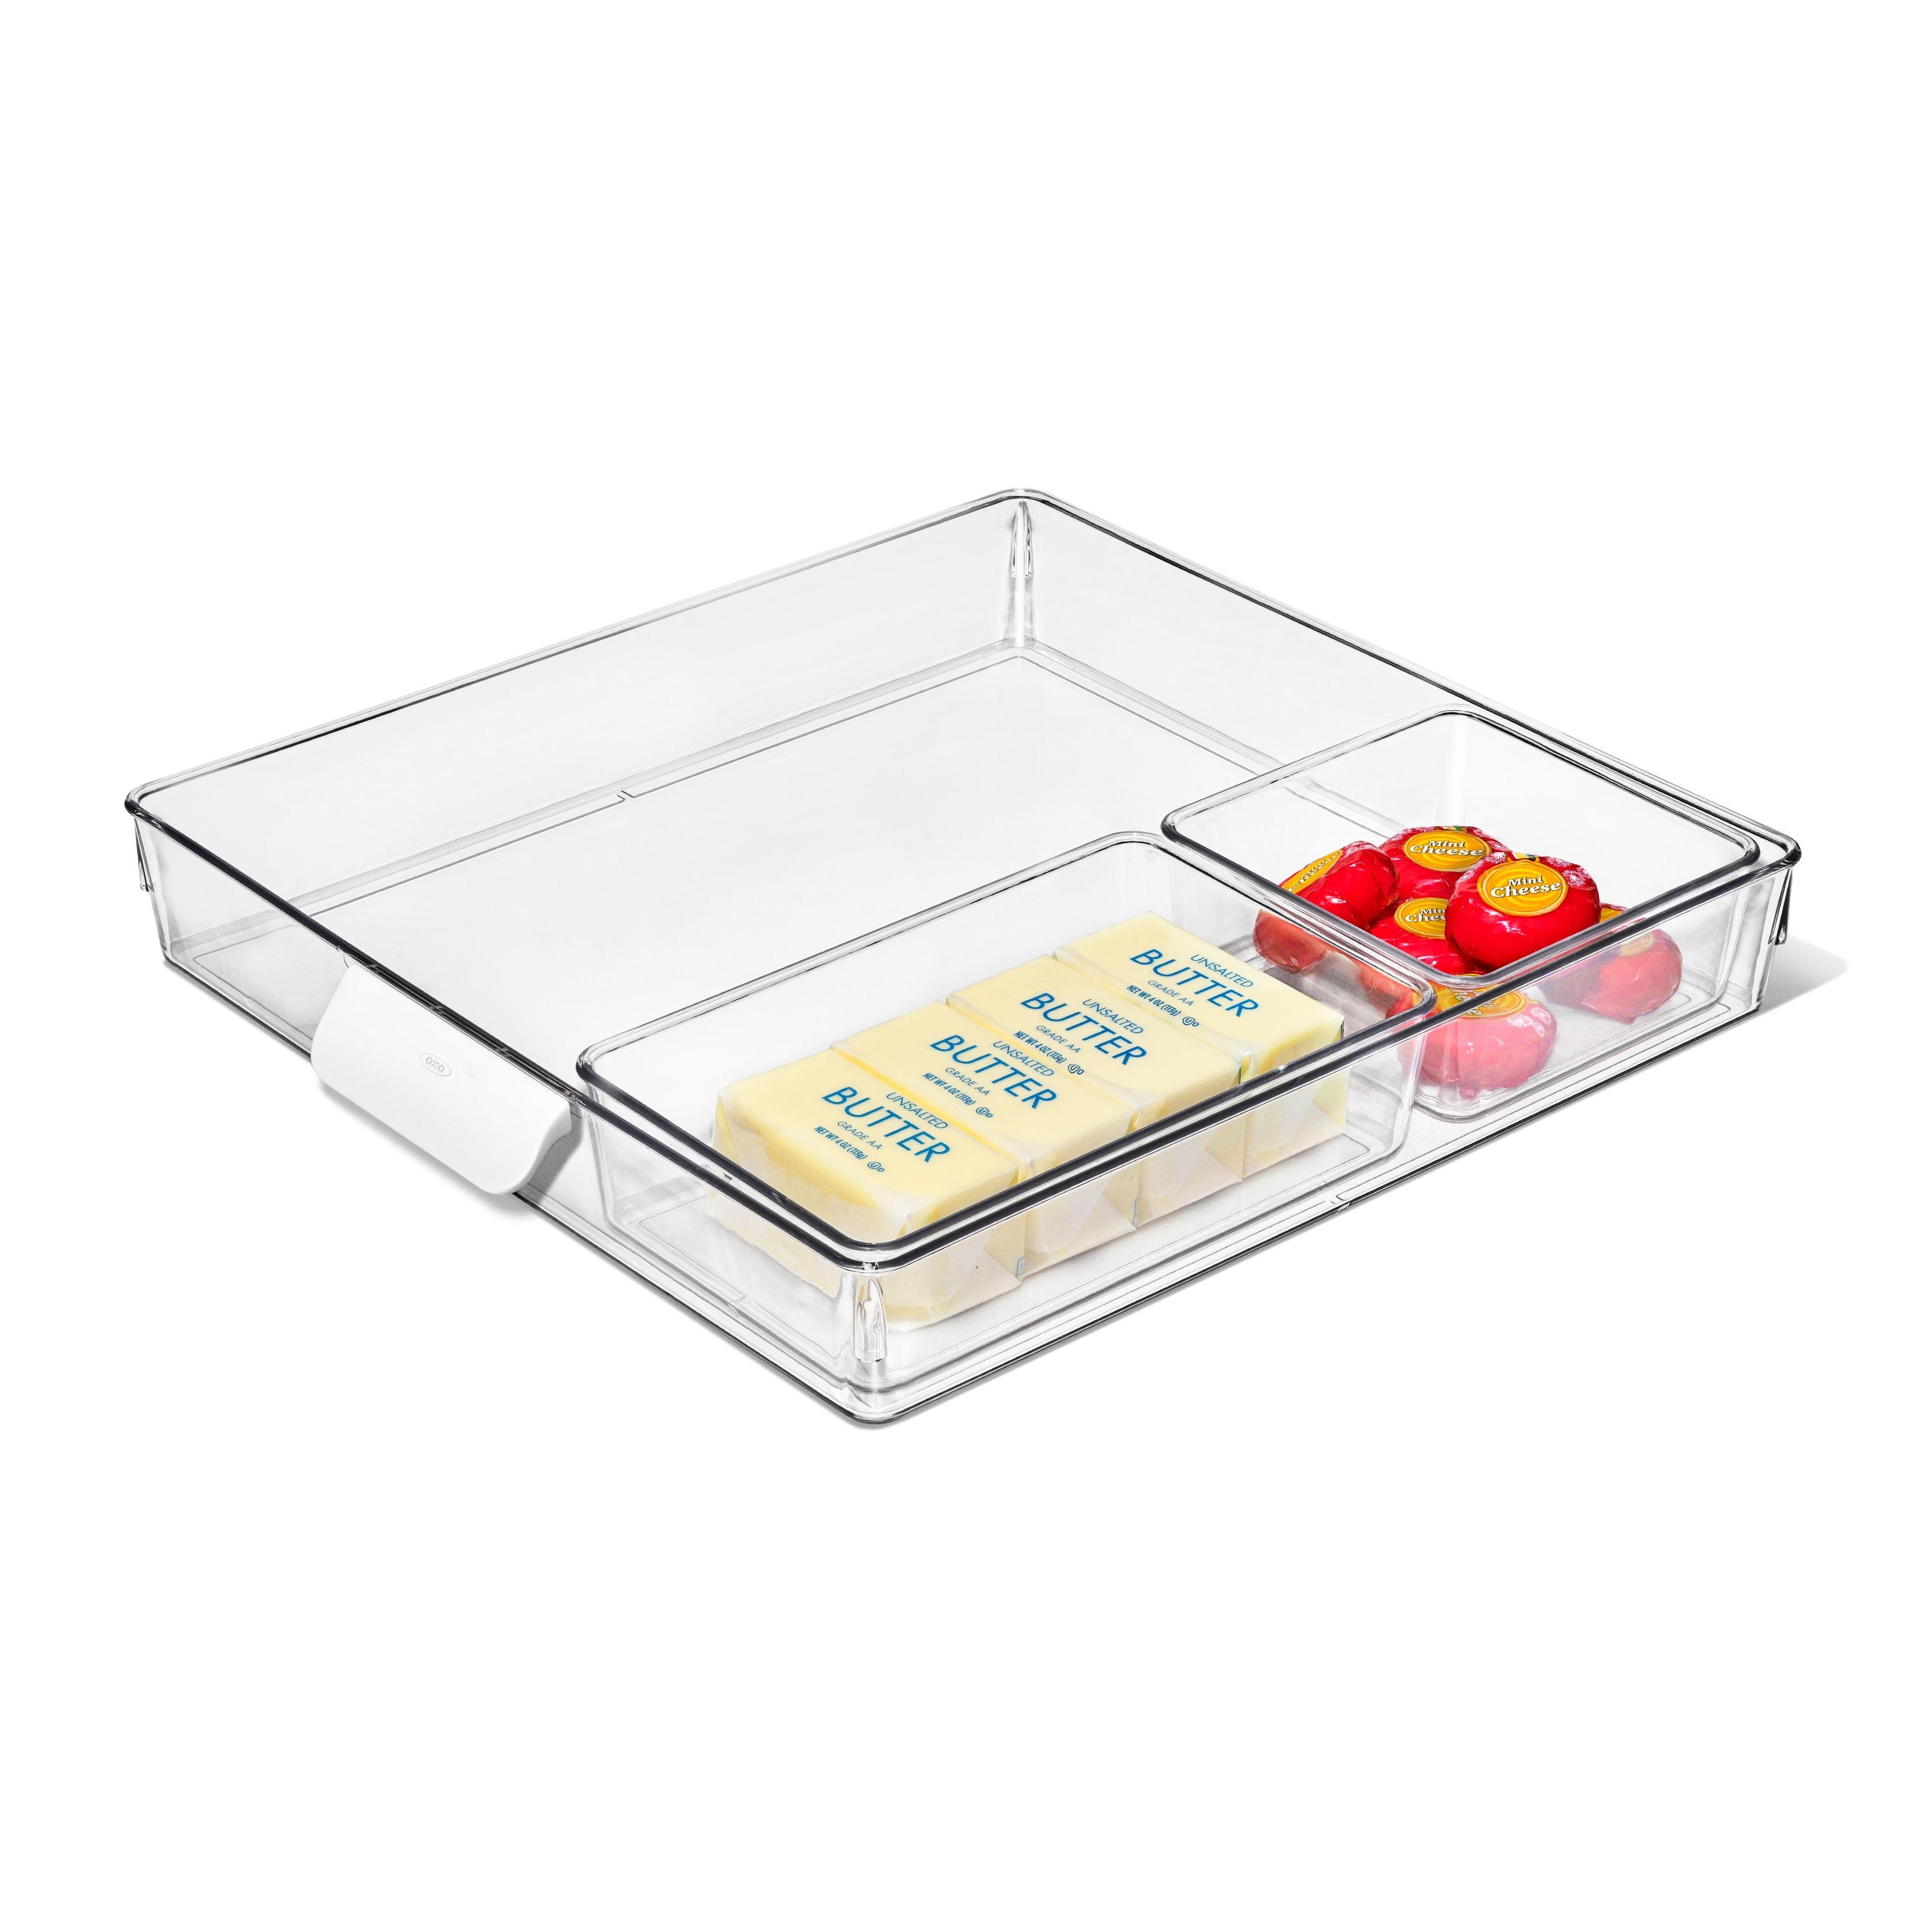 https://ak1.ostkcdn.com/images/products/is/images/direct/550a0e24aba5657ae41bc5a119d8a3a1b90f033f/OXO-Good-Grips-3-Piece-Refrigerator-Tray-Set.jpg